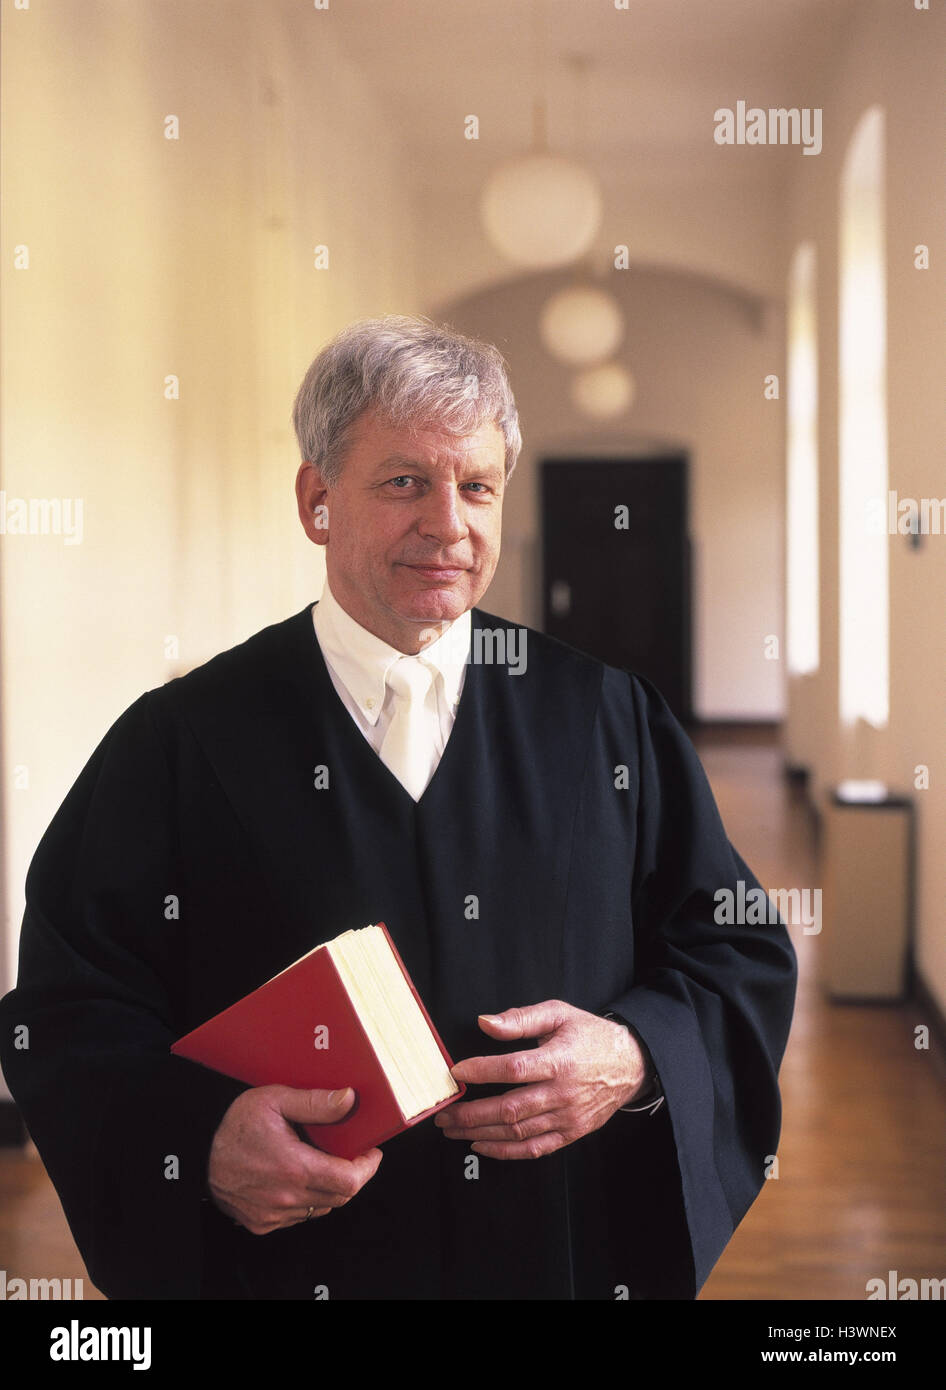 Sollicitor, code law, half portrait, man, occupation, lawyer, sollicitor, judge, court dress, justice, Jura, justice, Wahrheitsfindung, adjudication, view camera, smile, contently, seriously, courthouse, hall, inside Stock Photo